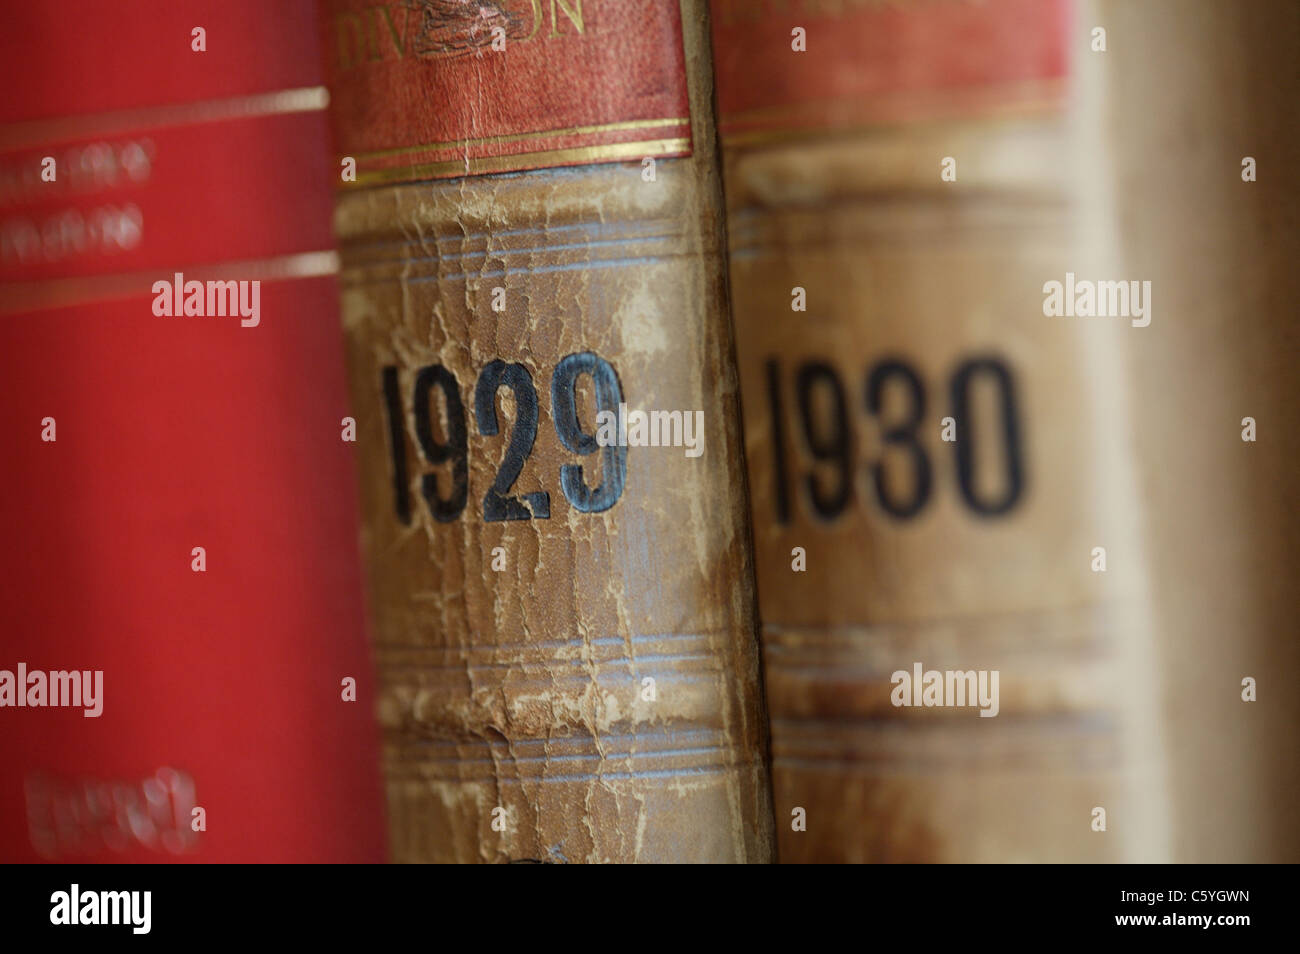 Old book spines showing 1929 and 1930 Stock Photo